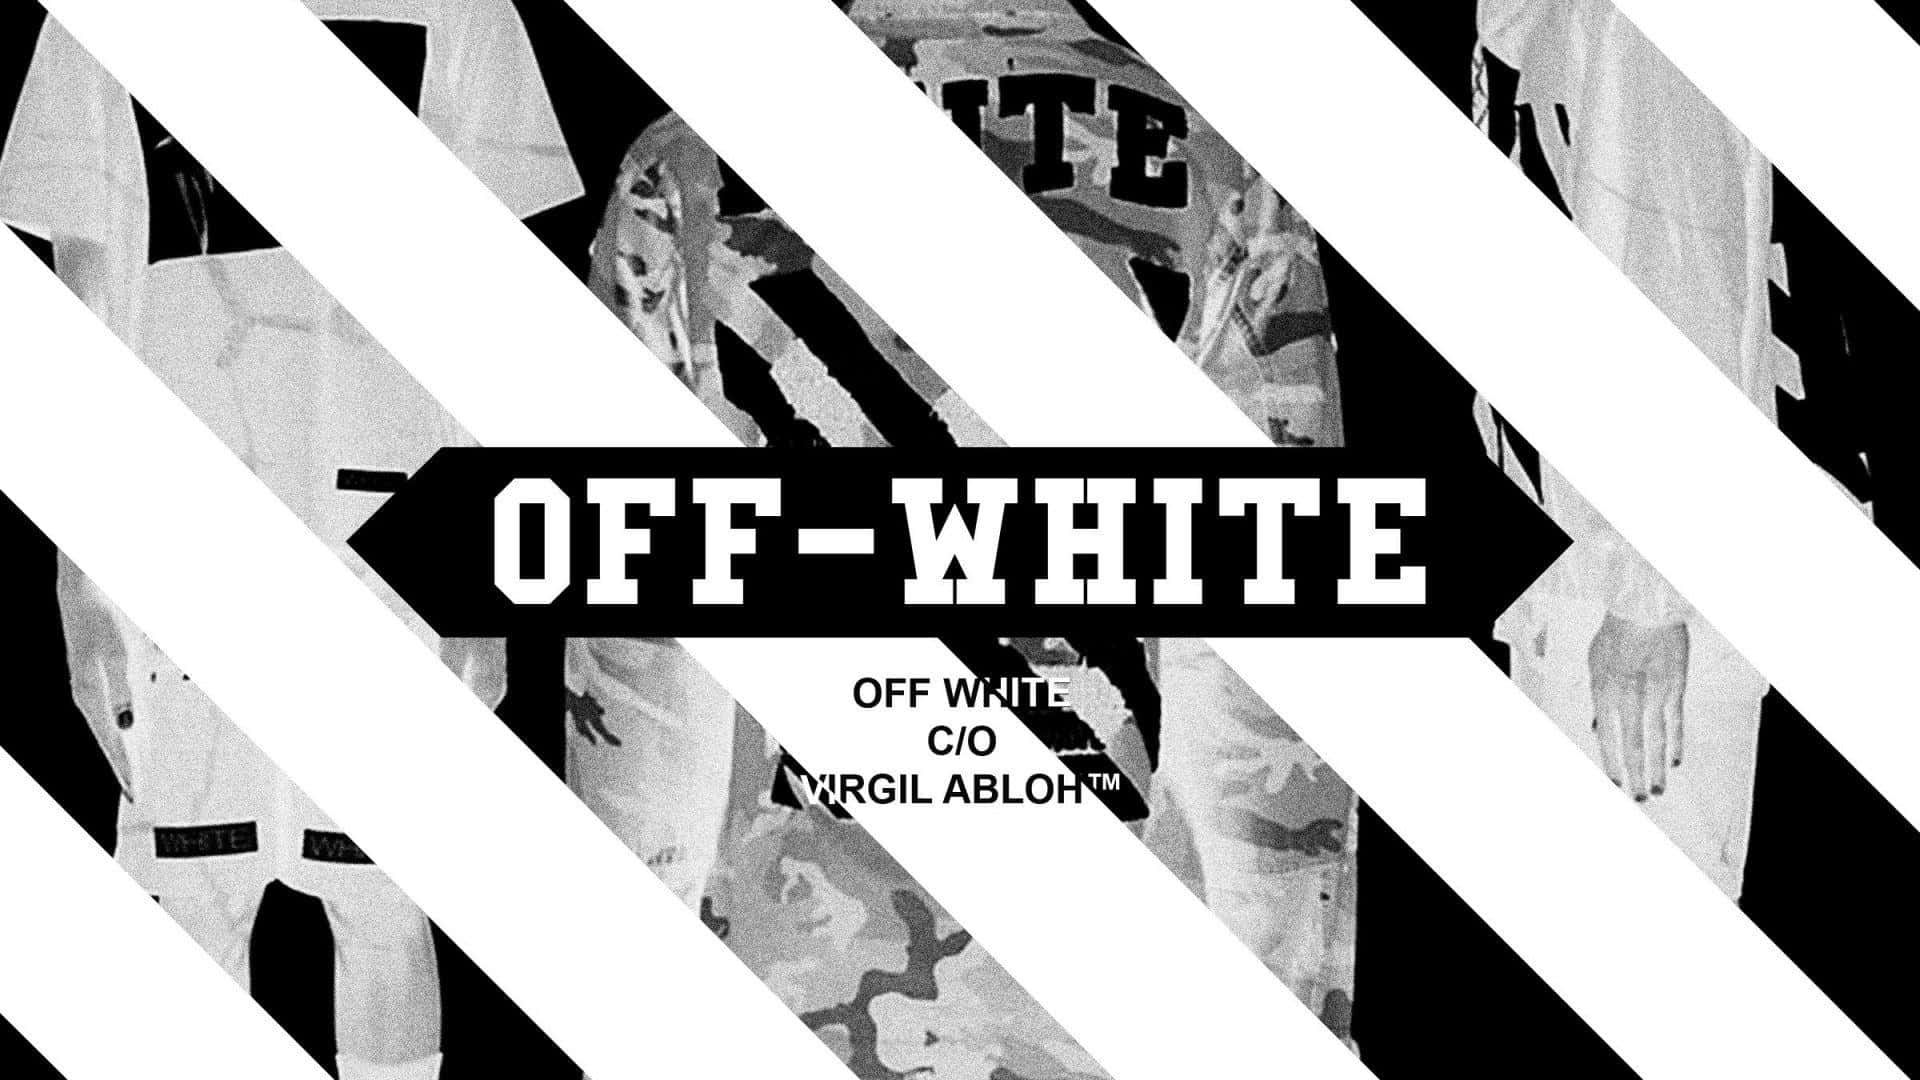 HYPEBEAST WALLPAPERS  The Off-White^TM Collection